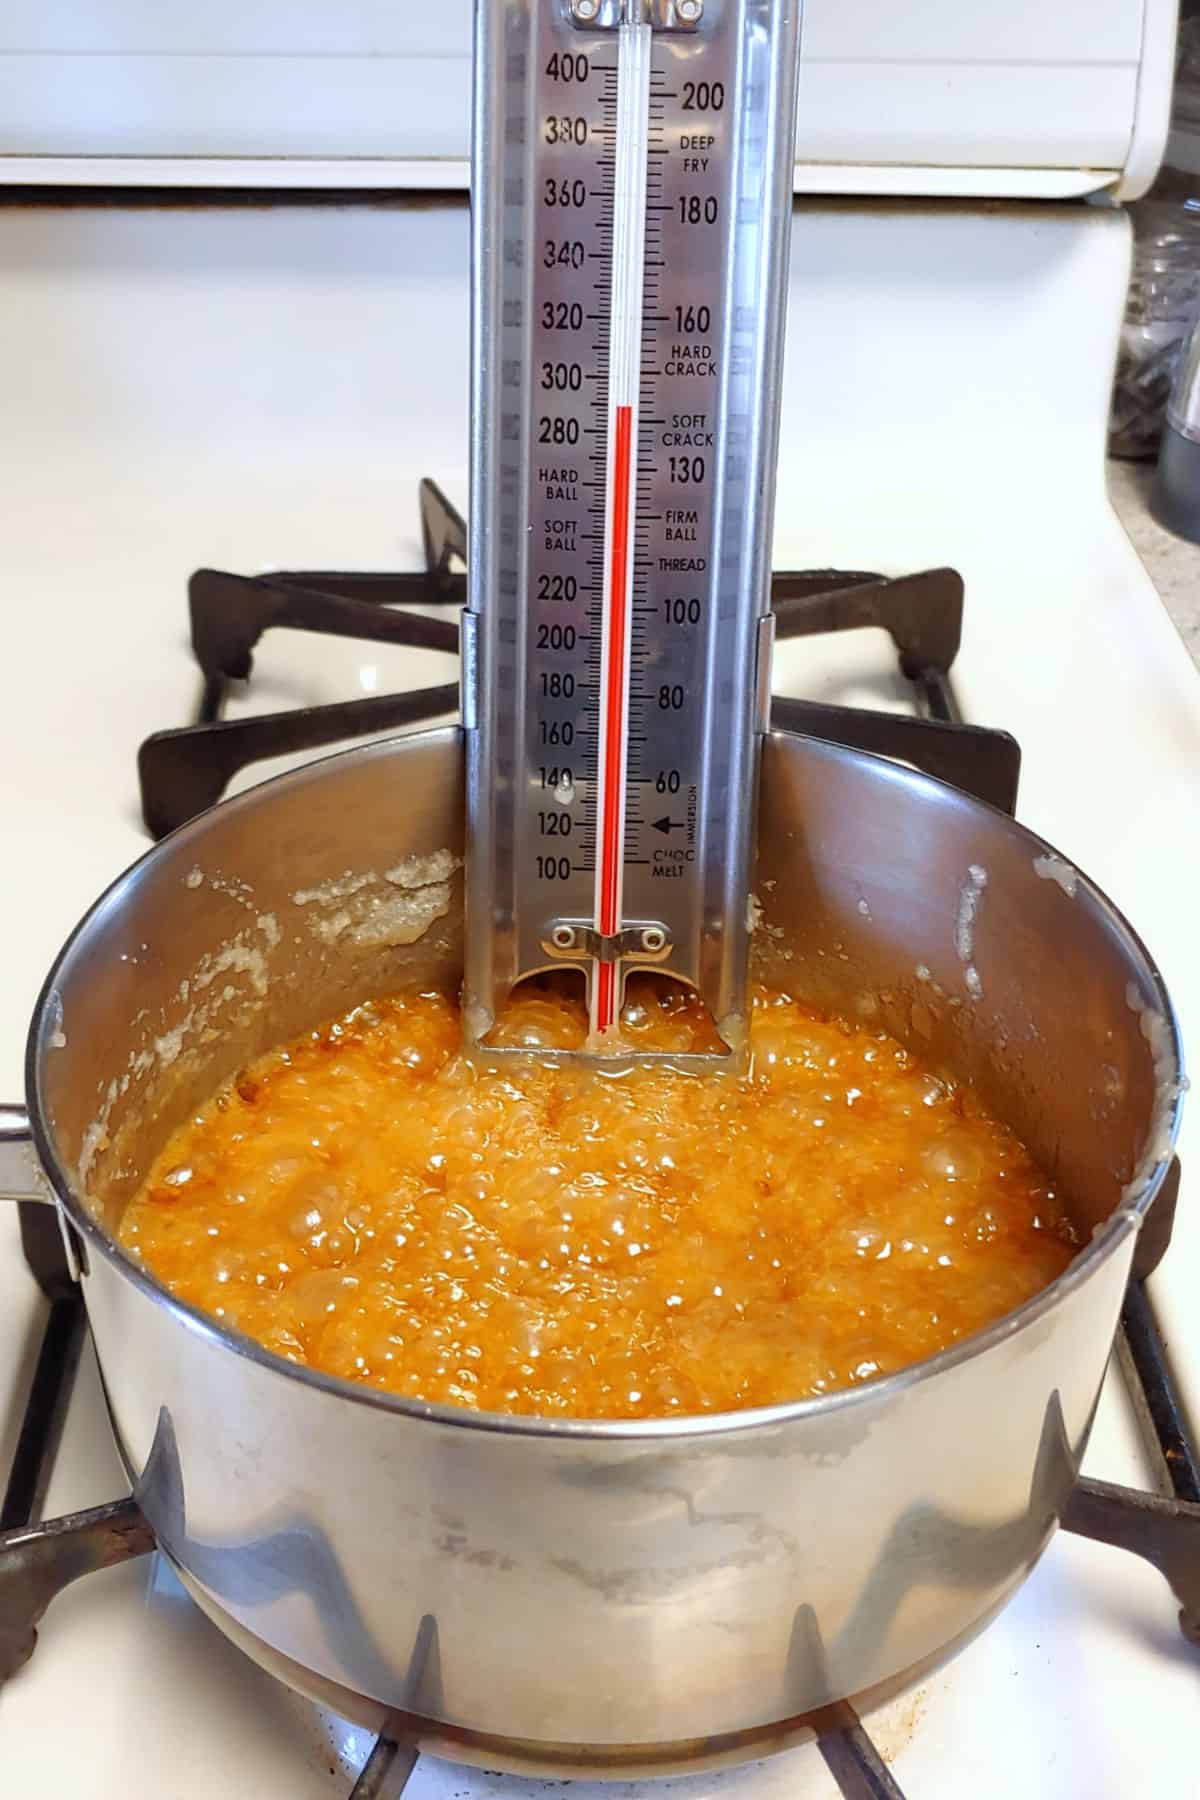 syrup boiling, reaching the brittle stage